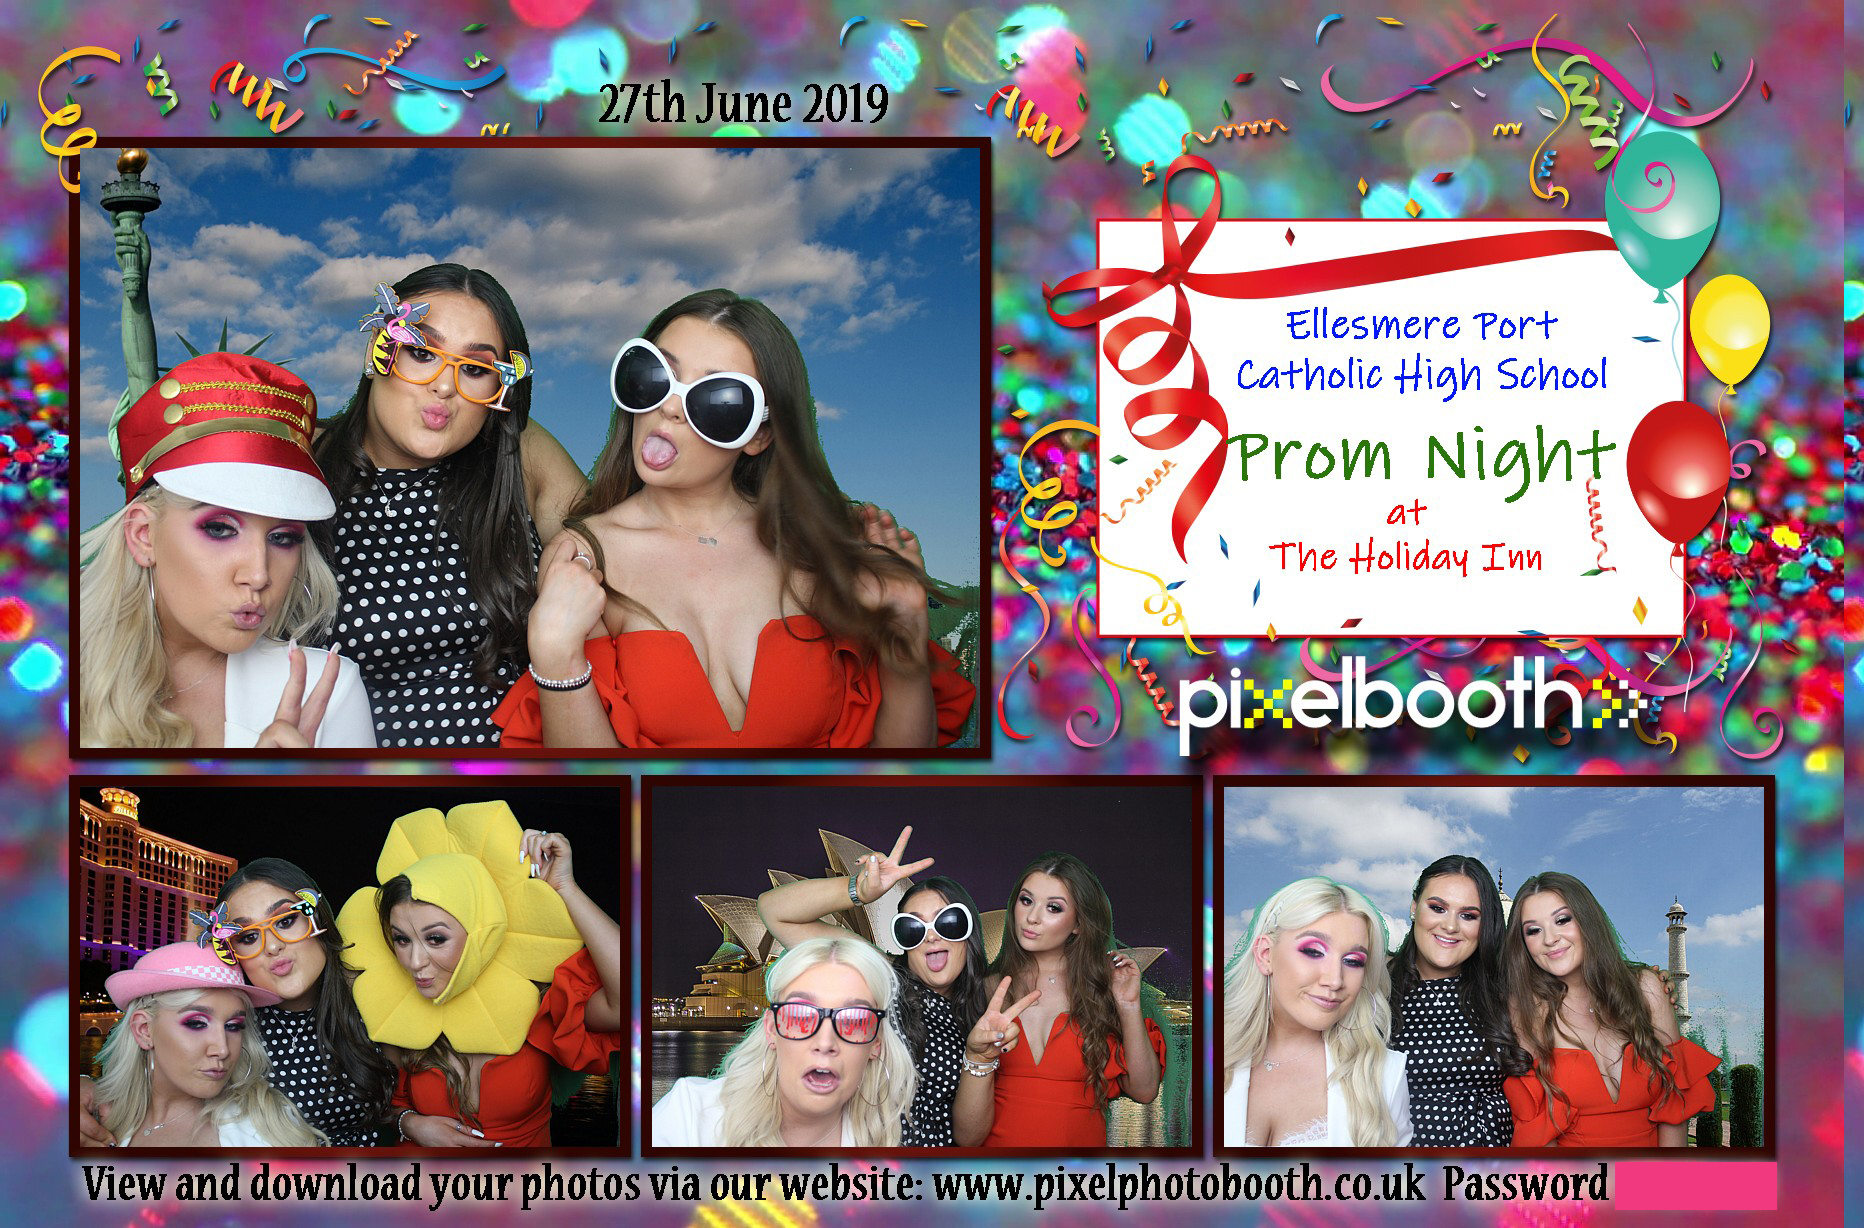 27th June 2019: EPCHS Prom Night at The Hoiday Inn